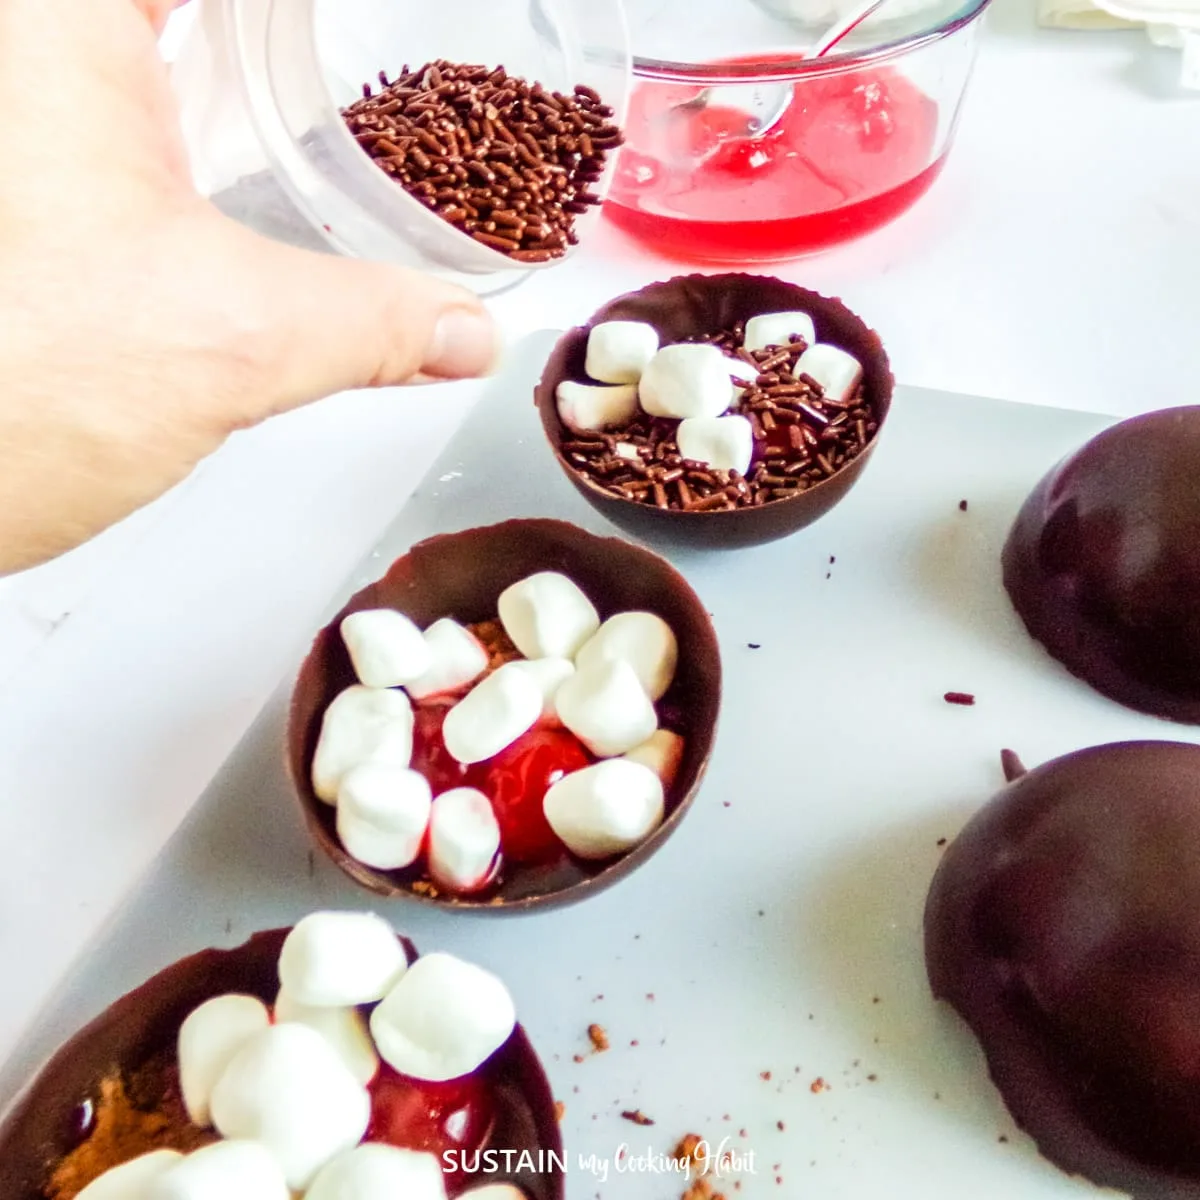 Filling the chocolate cup with ingredients.